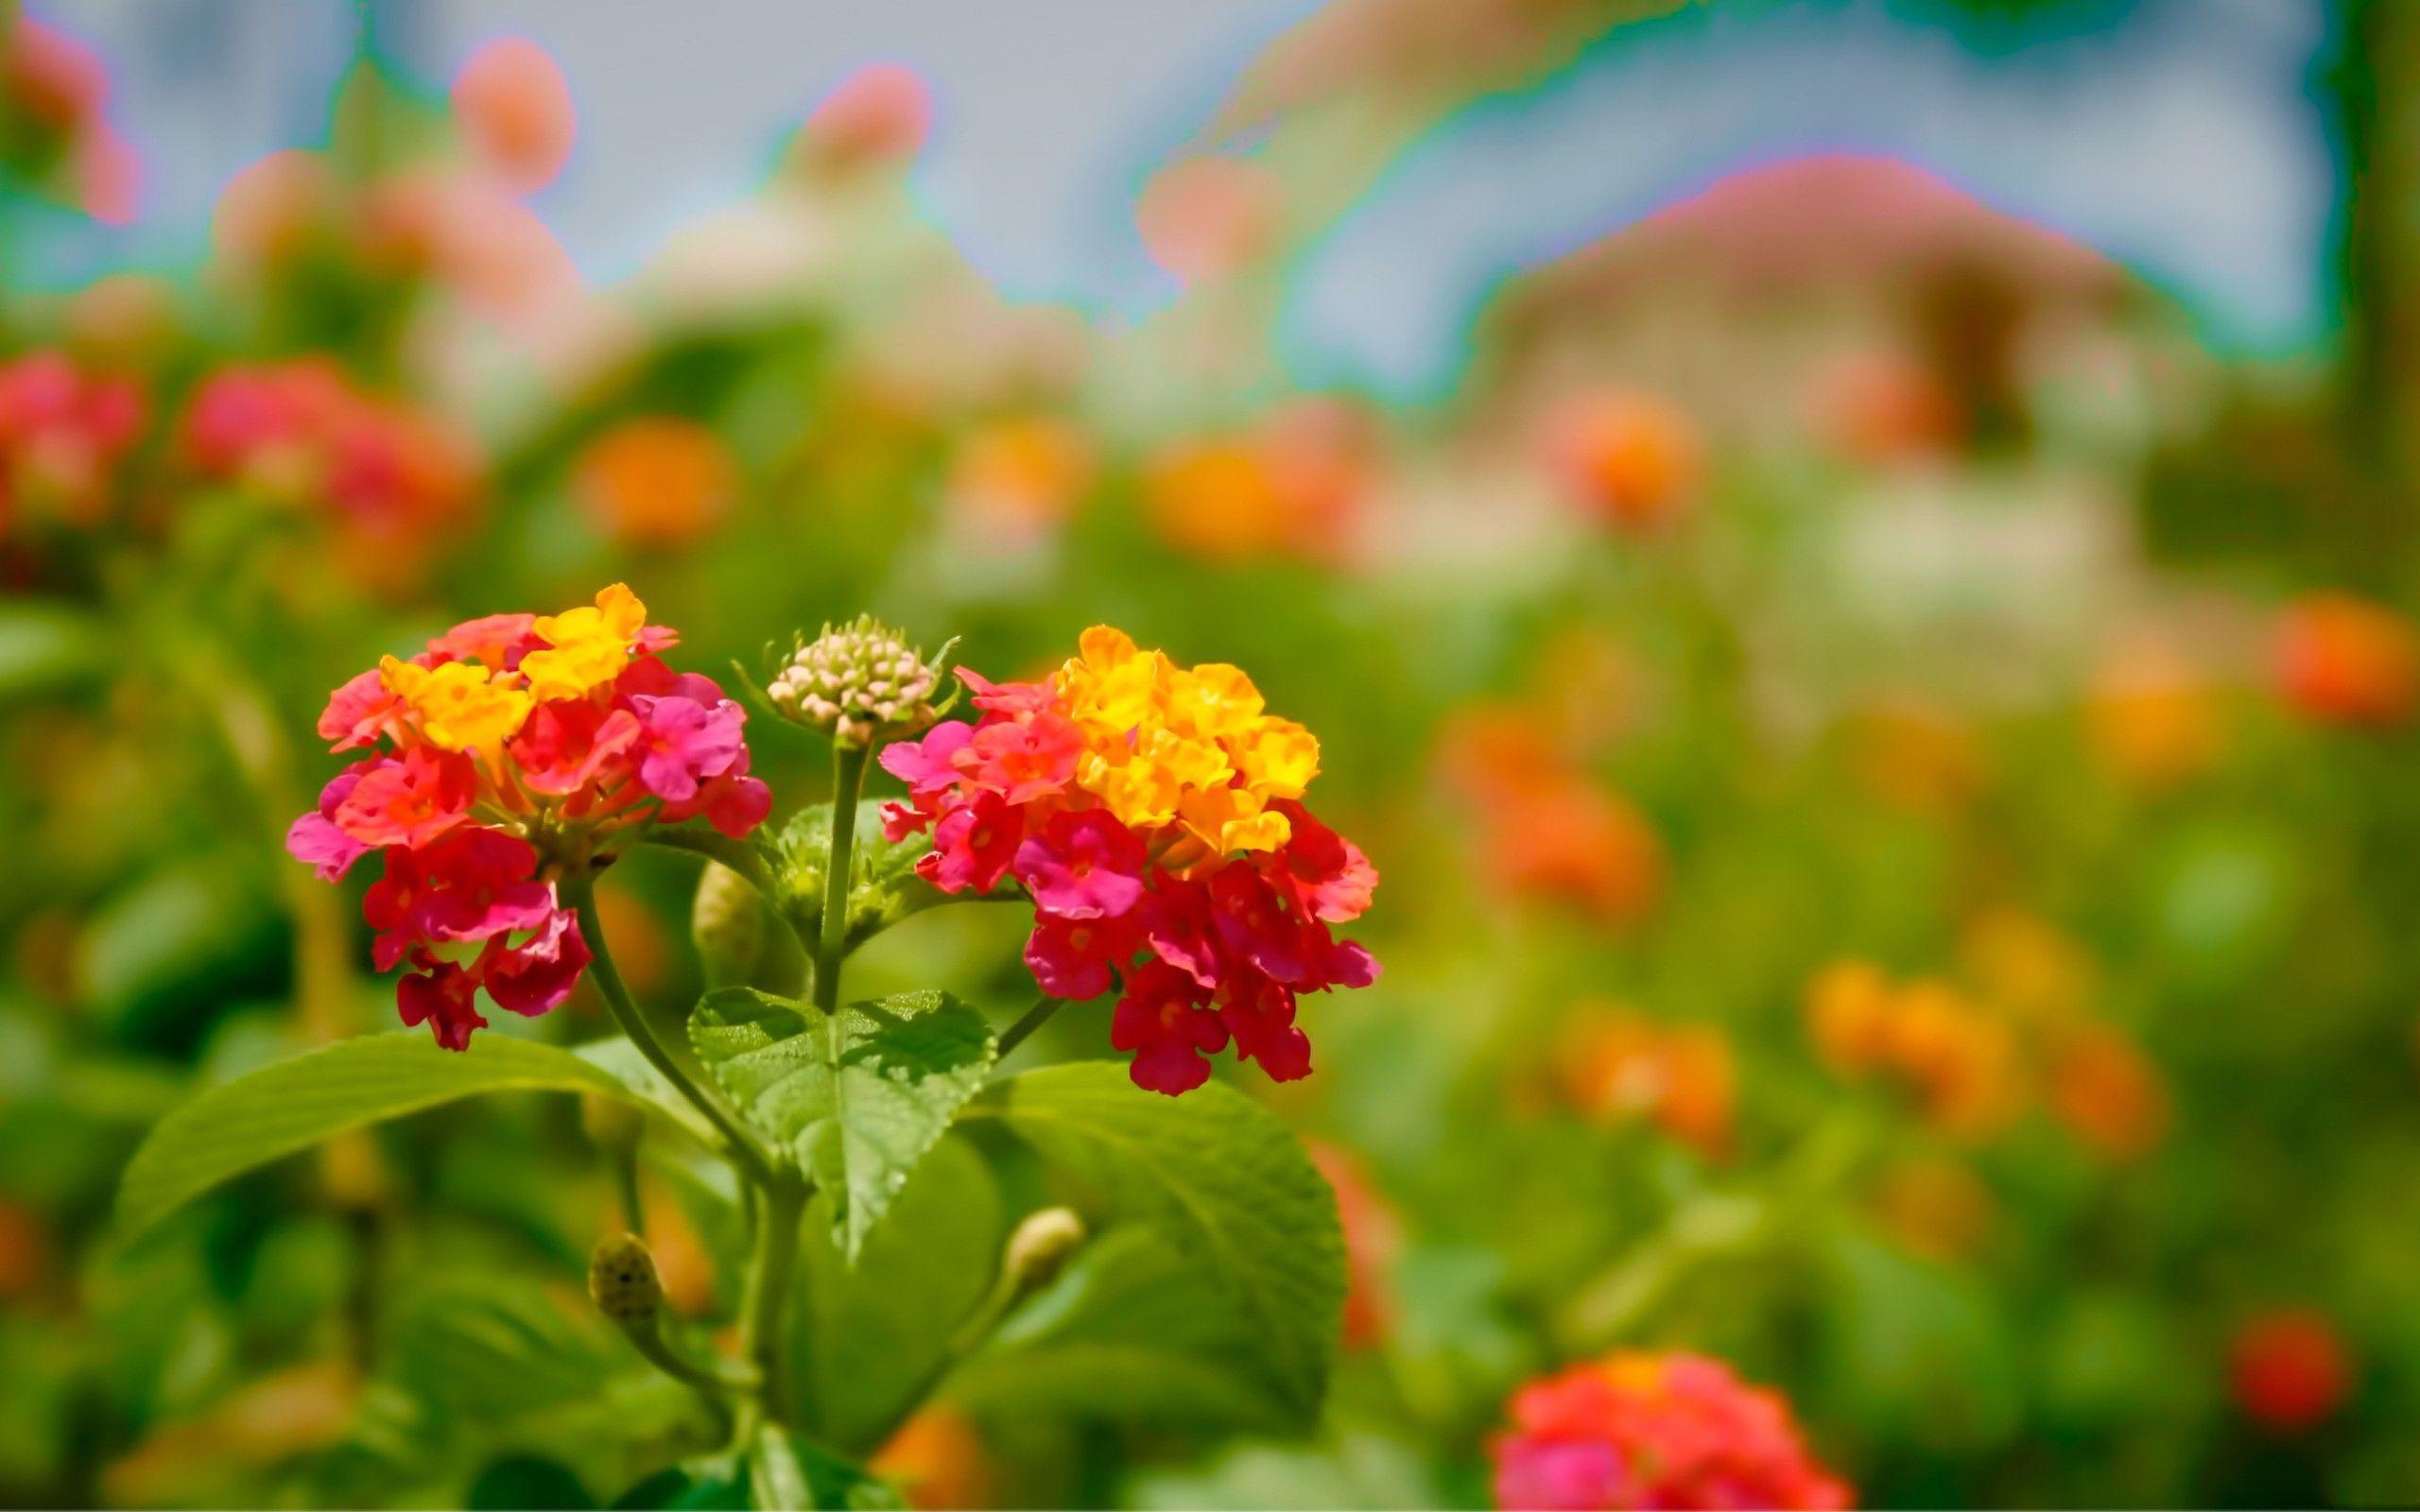 Colorful Pictures Of Flowers - colorful annual flowers.jpg Hi-Res 720p ...